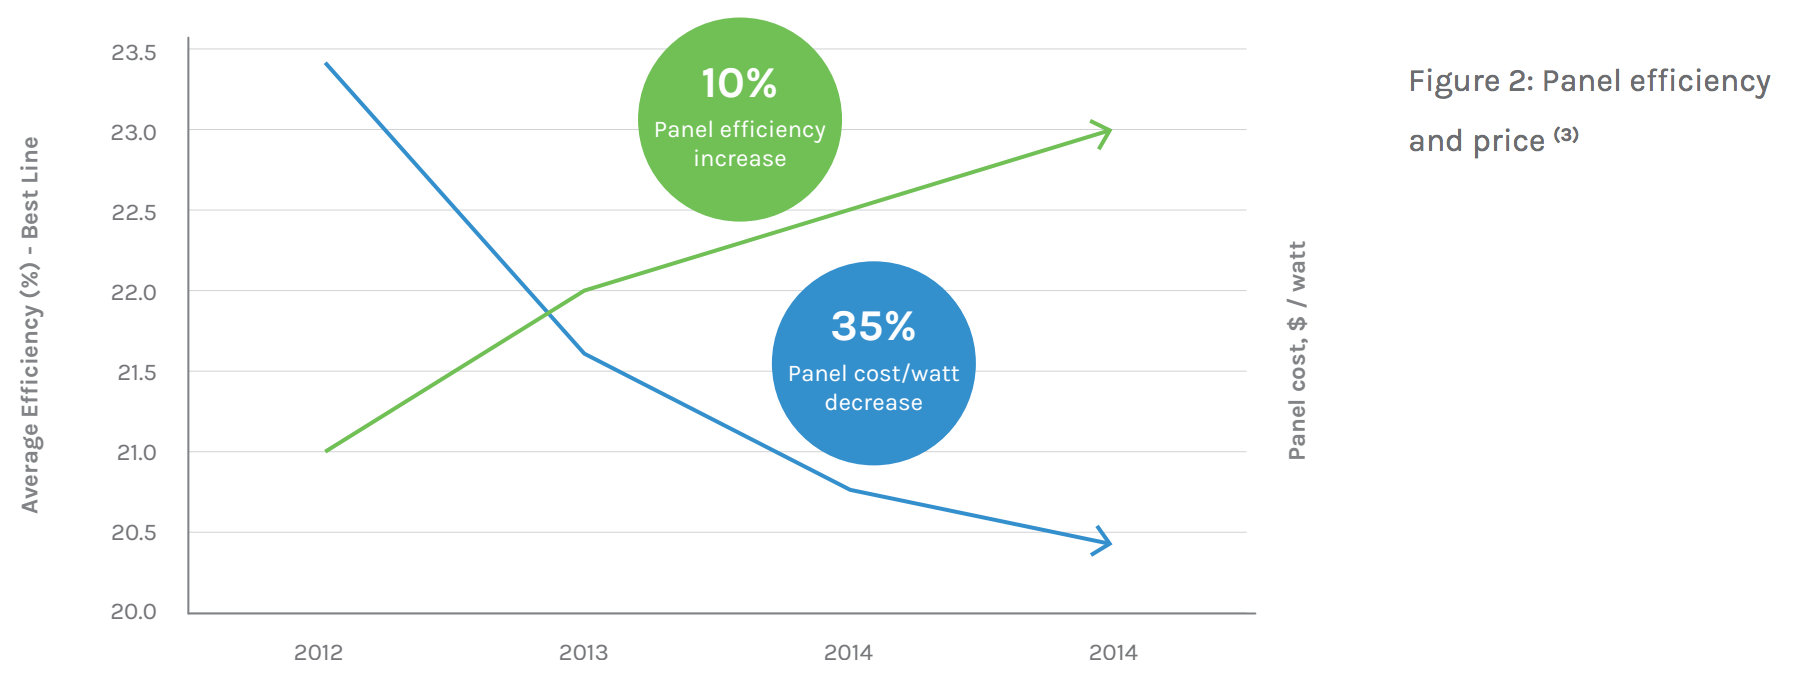 Panel efficiency and price